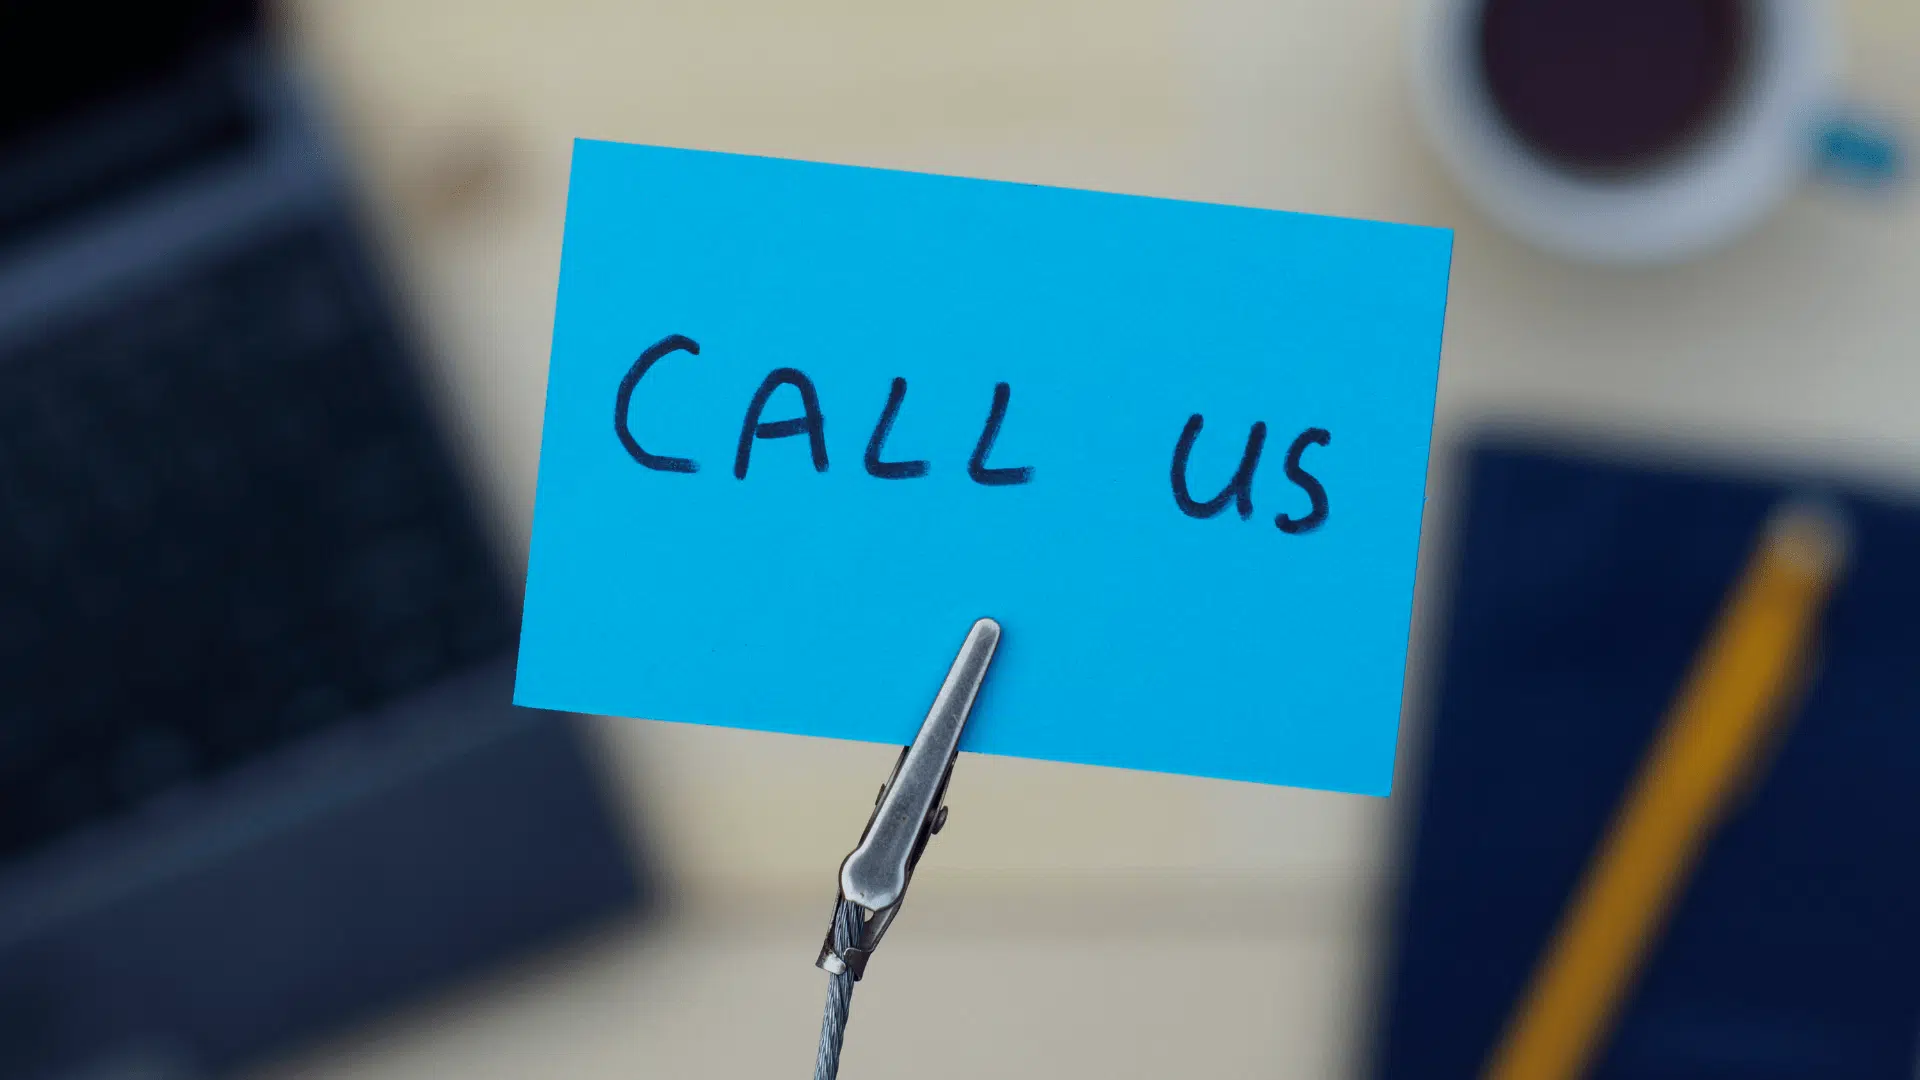 Blue sticky note with "call us" written on it, clipped to a stand with blurred laptop and coffee cup in the background.